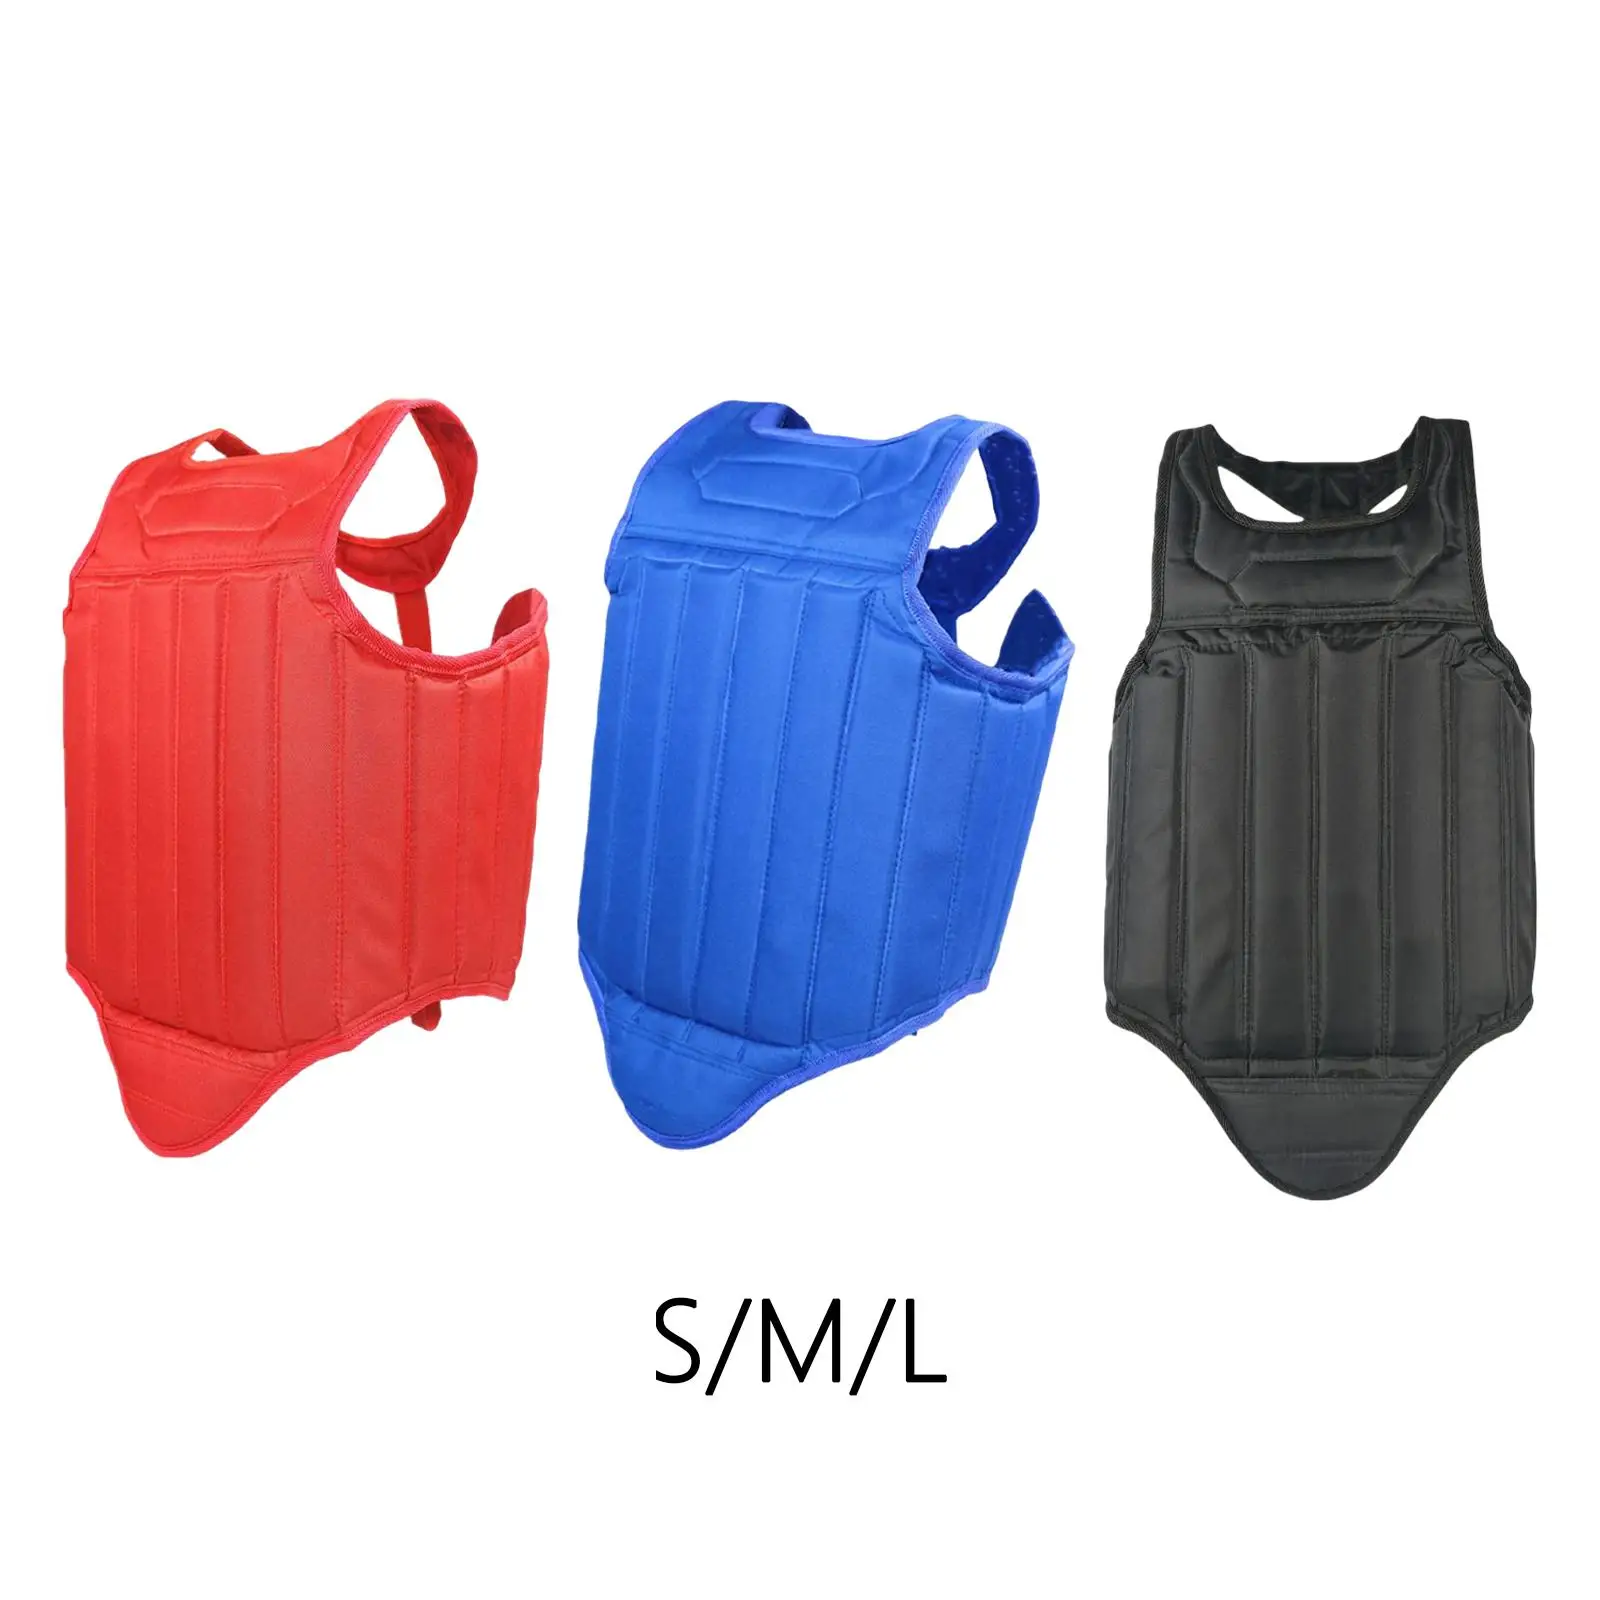 Unisex Karate Chest Guard Taekwondo Protector Rib Shield Armour Mma Body Protector for Sparring Training Boxing Accessories